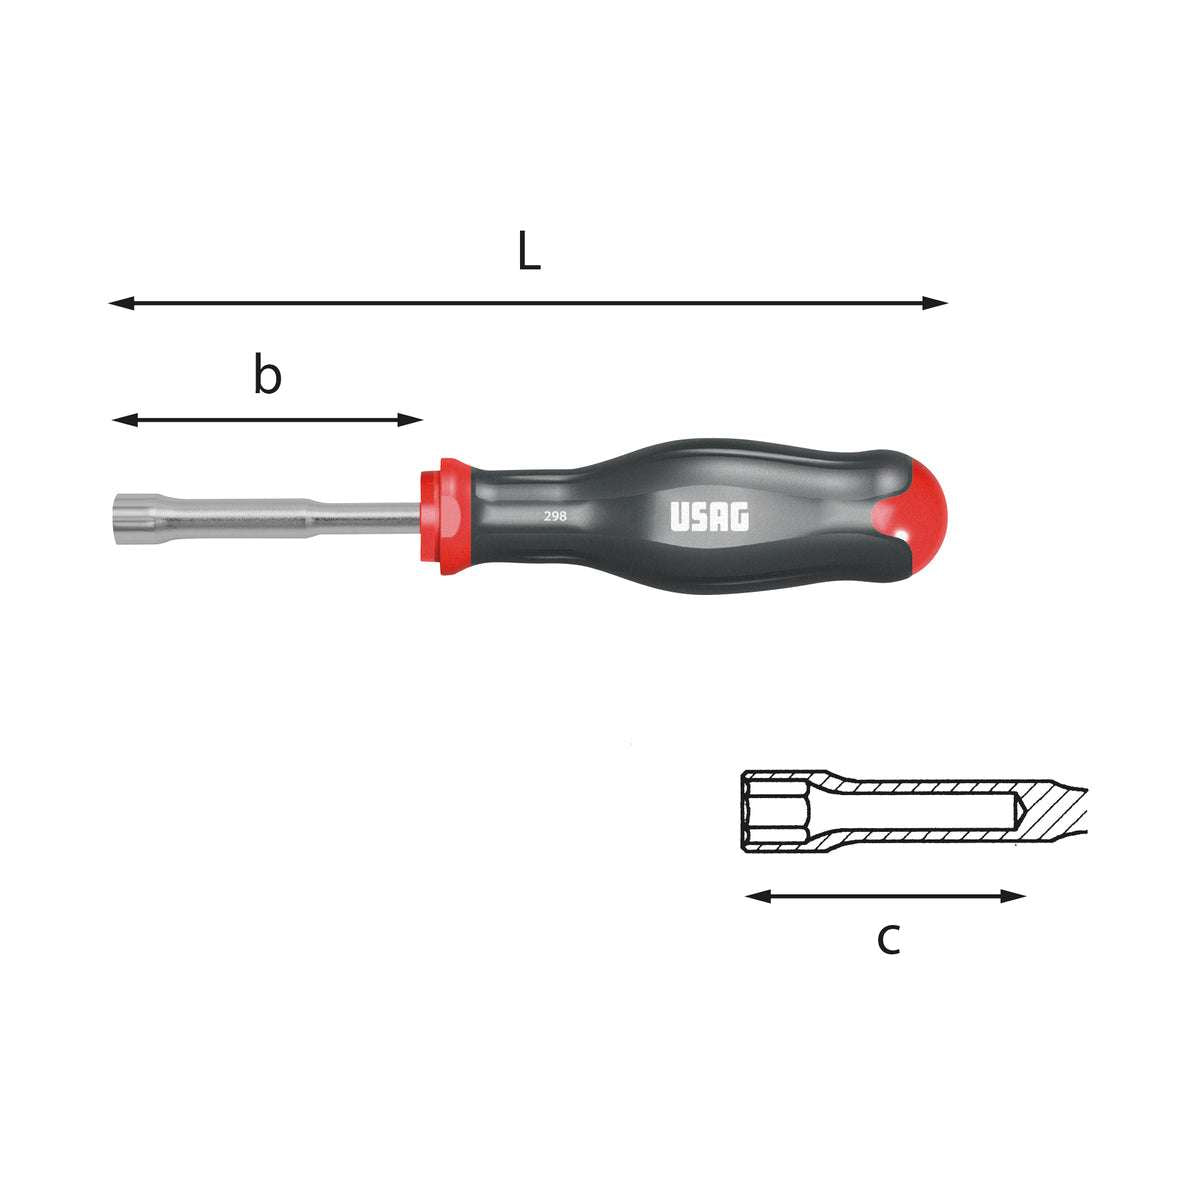 13mm hexagon socket wrench with short handle M4 L198 - Usag 298